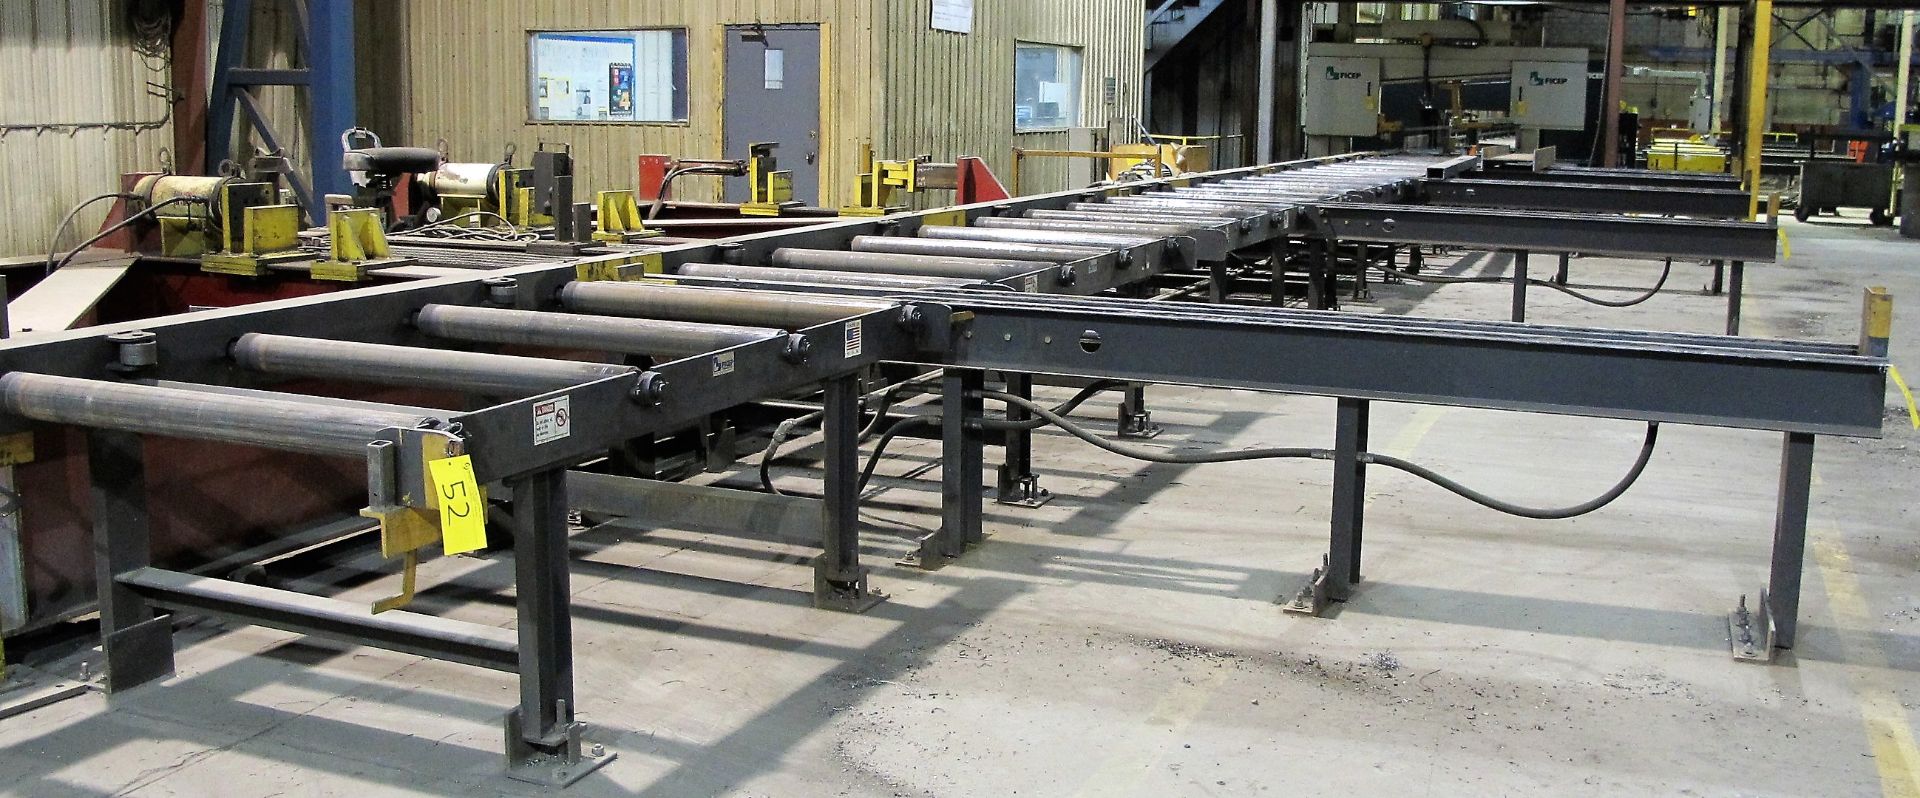 2009 FICEP BEAM DRILL LINE CONSISTING OF: FICEP 1001 DFB BEAM DRILL, S/N 32133, TANDEM CNC/PLC - Image 26 of 29